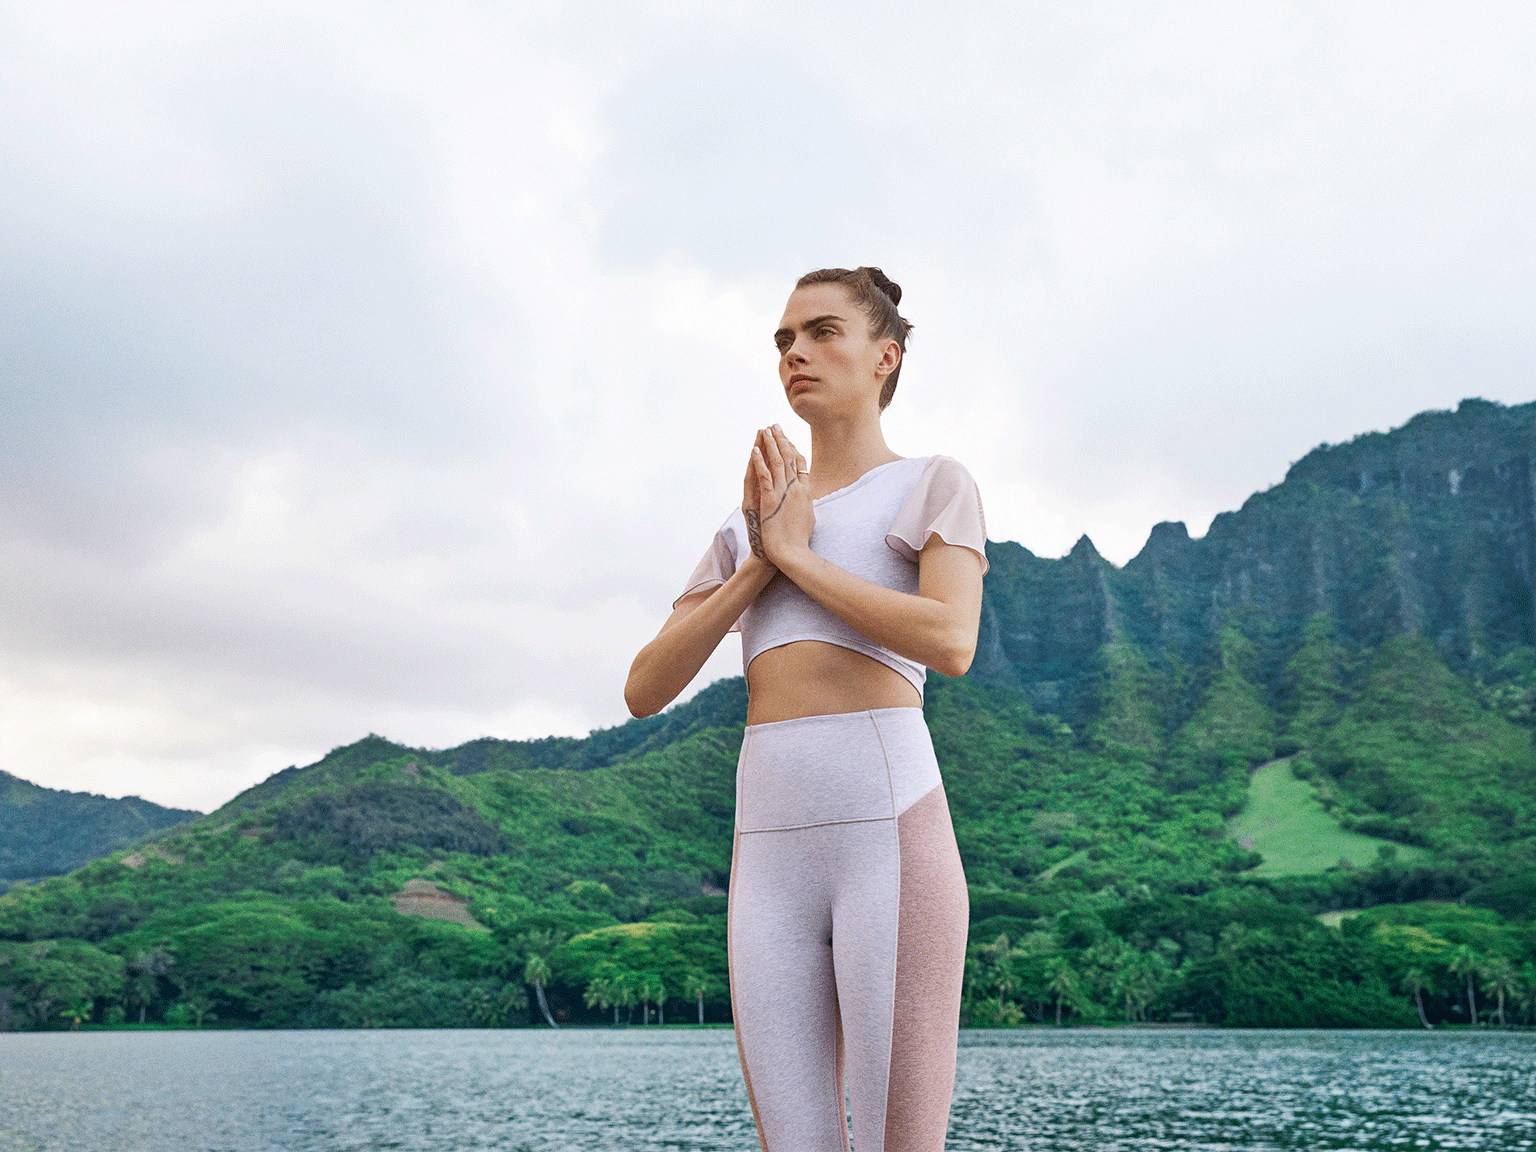 Cara Delevingne and Puma team up on a sustainable yoga clothing collection